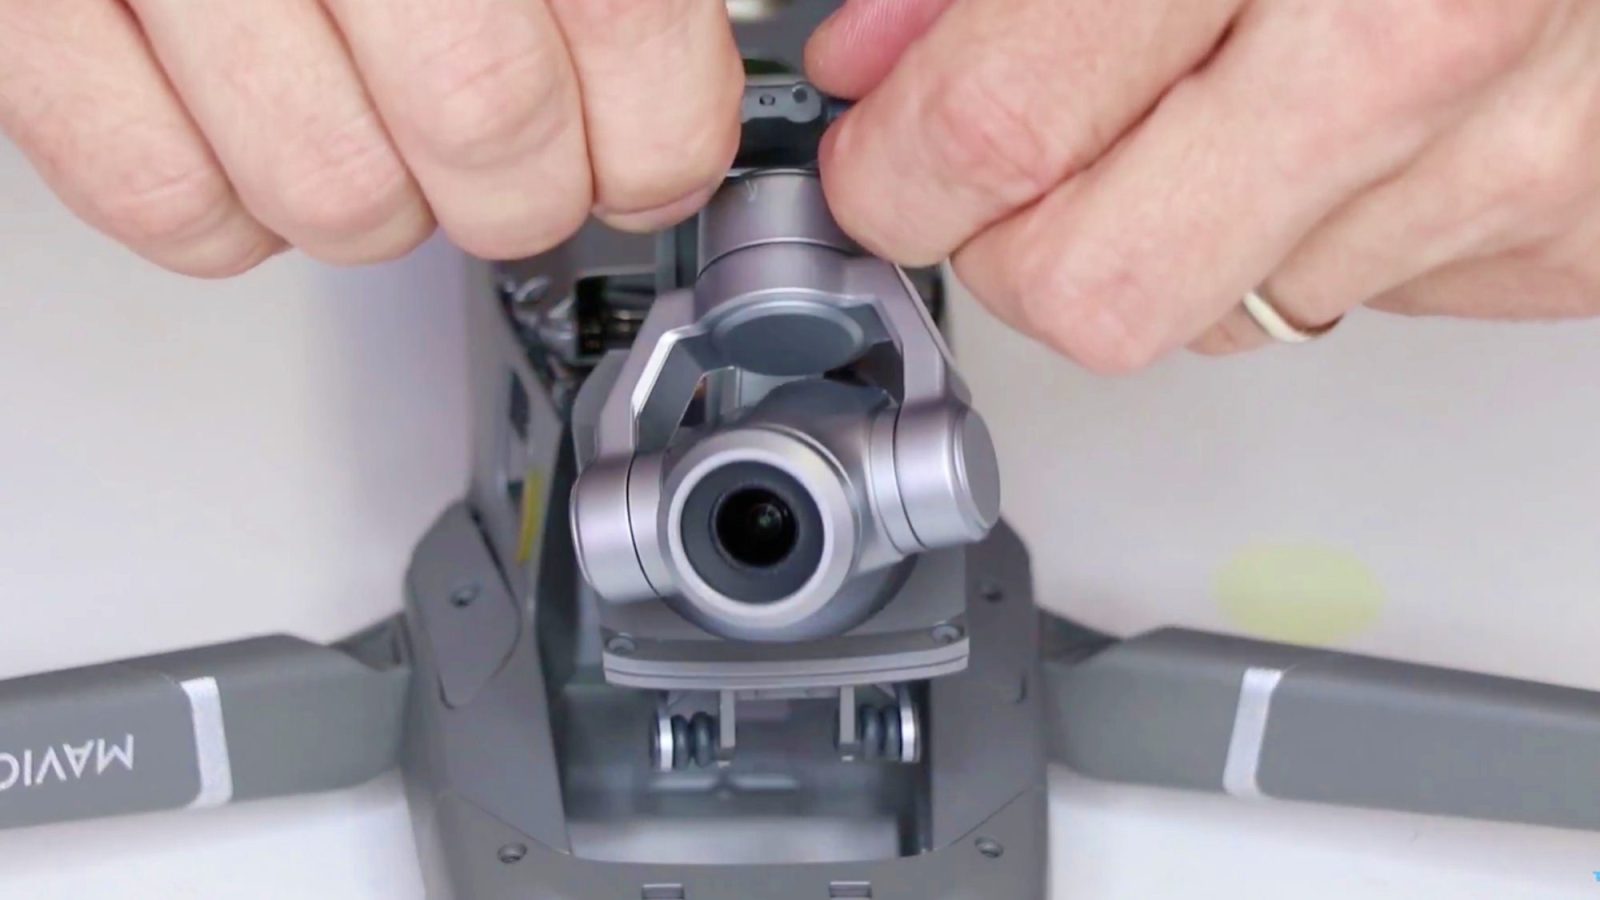 DIY - How to swap the camera on your DJI Mavic 2 drone yourself